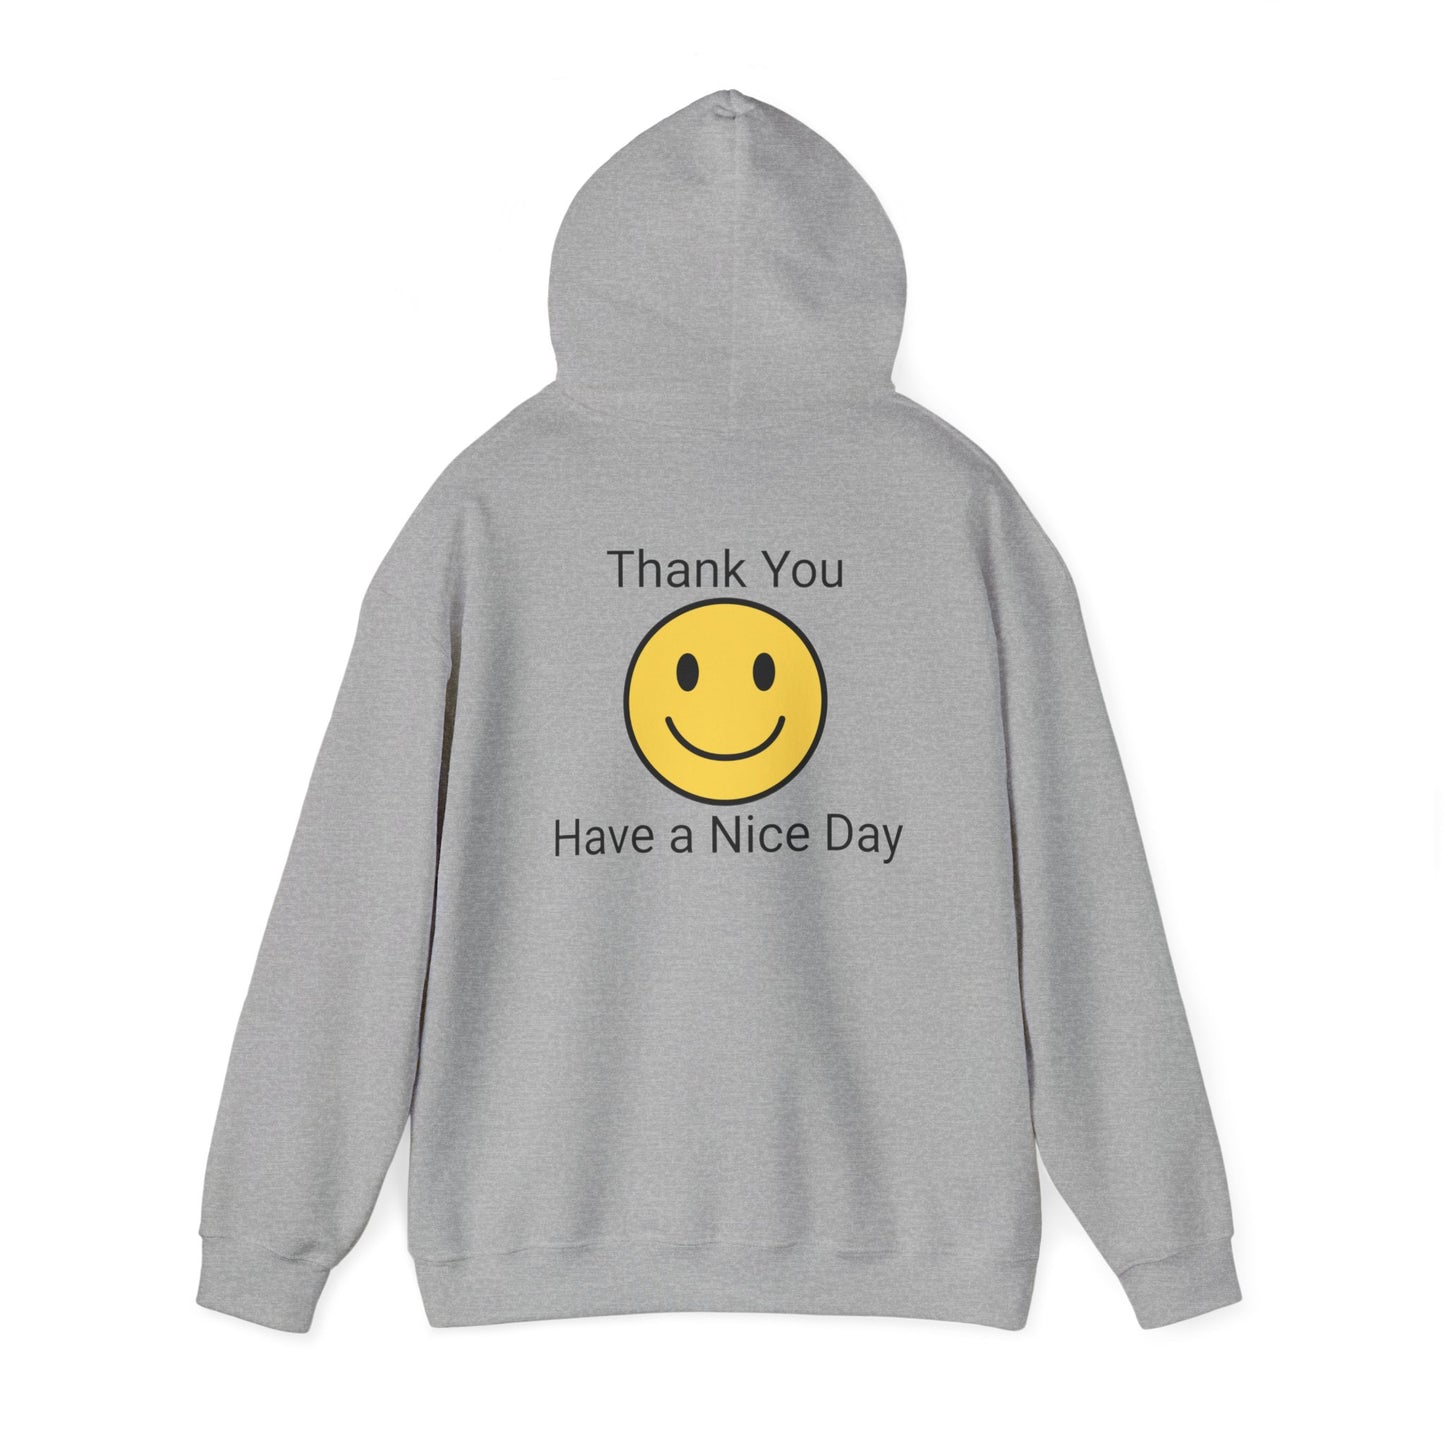 Have a Nice Day - Cozy Comfort Unisex Heavy Blend Hooded Sweatshirt: Warmth Meets Style